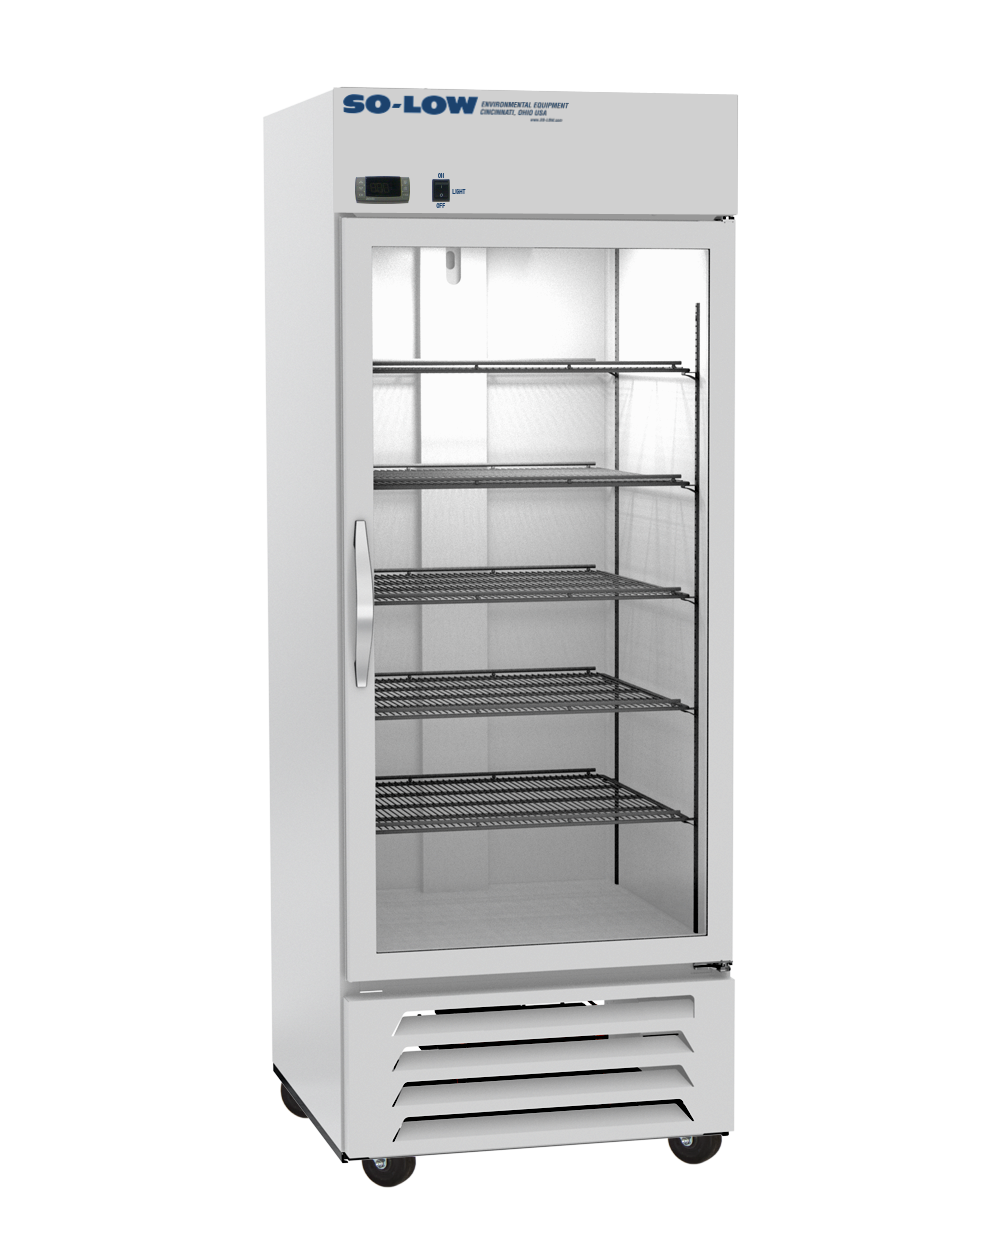 So-Low 2ºC to 8ºC, 27 cu.ft., single glass door, Cycle Defrost, 115v